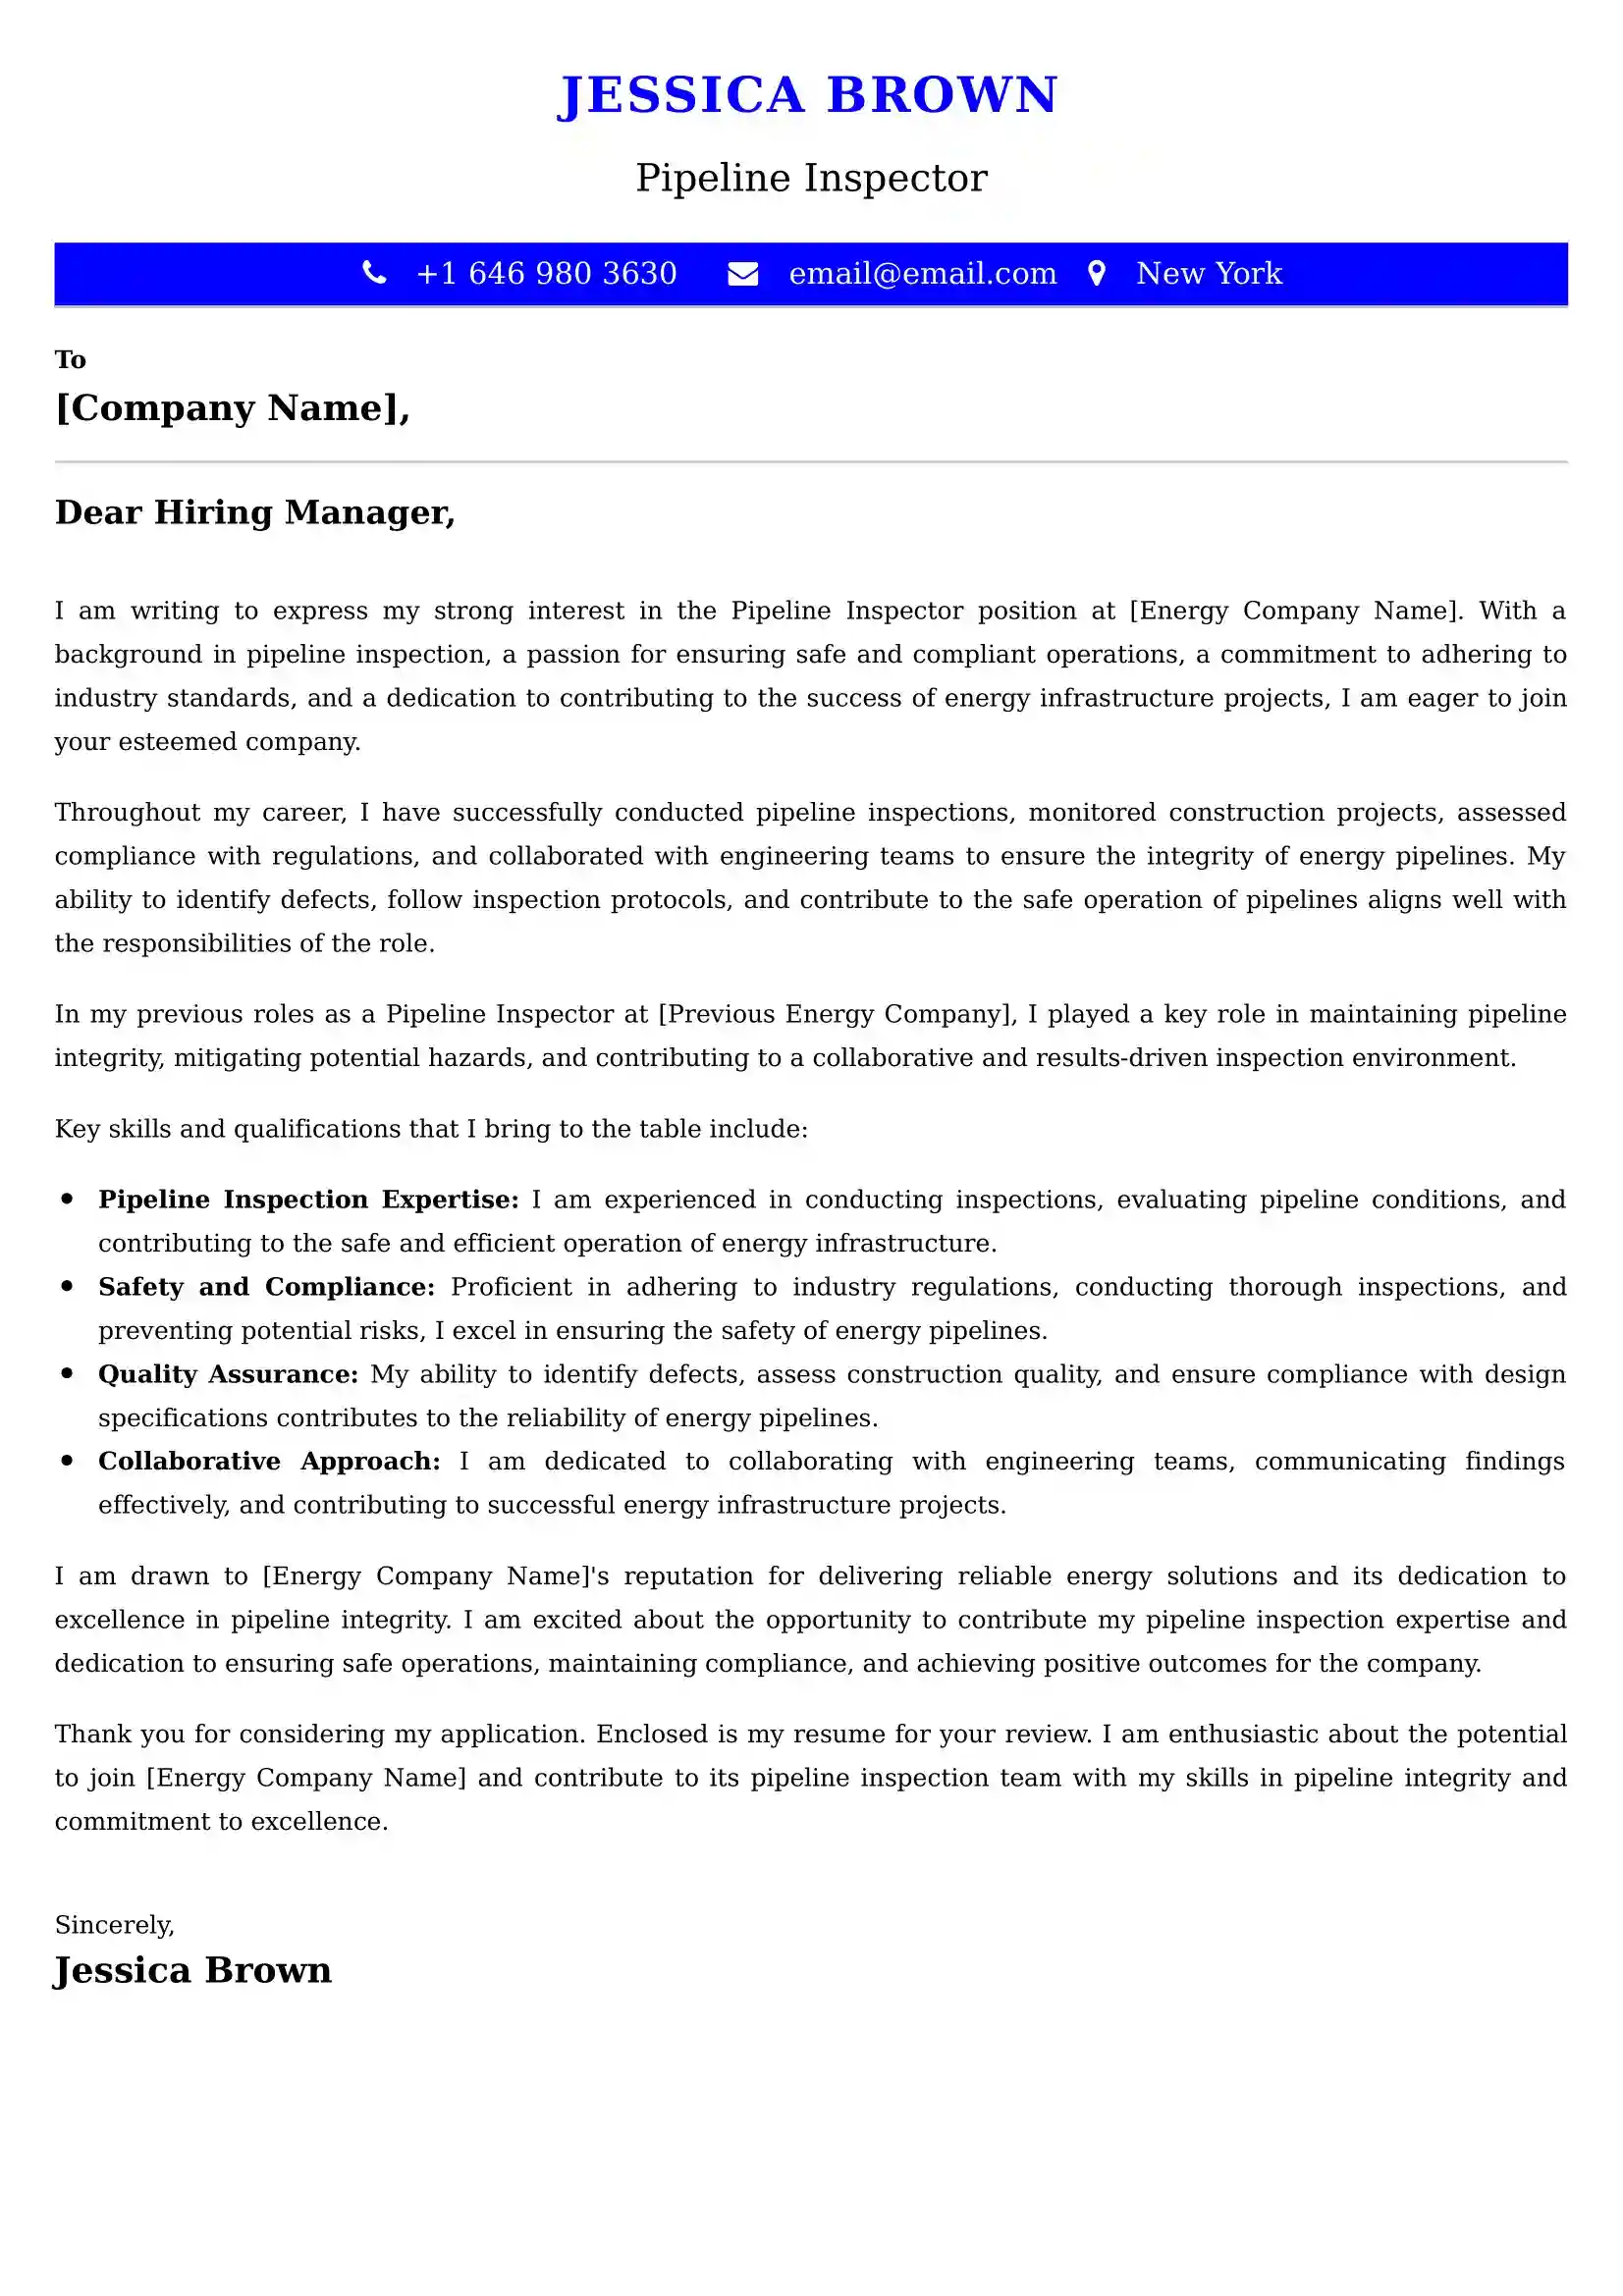 Pipeline Inspector Cover Letter Examples - Latest UK Format